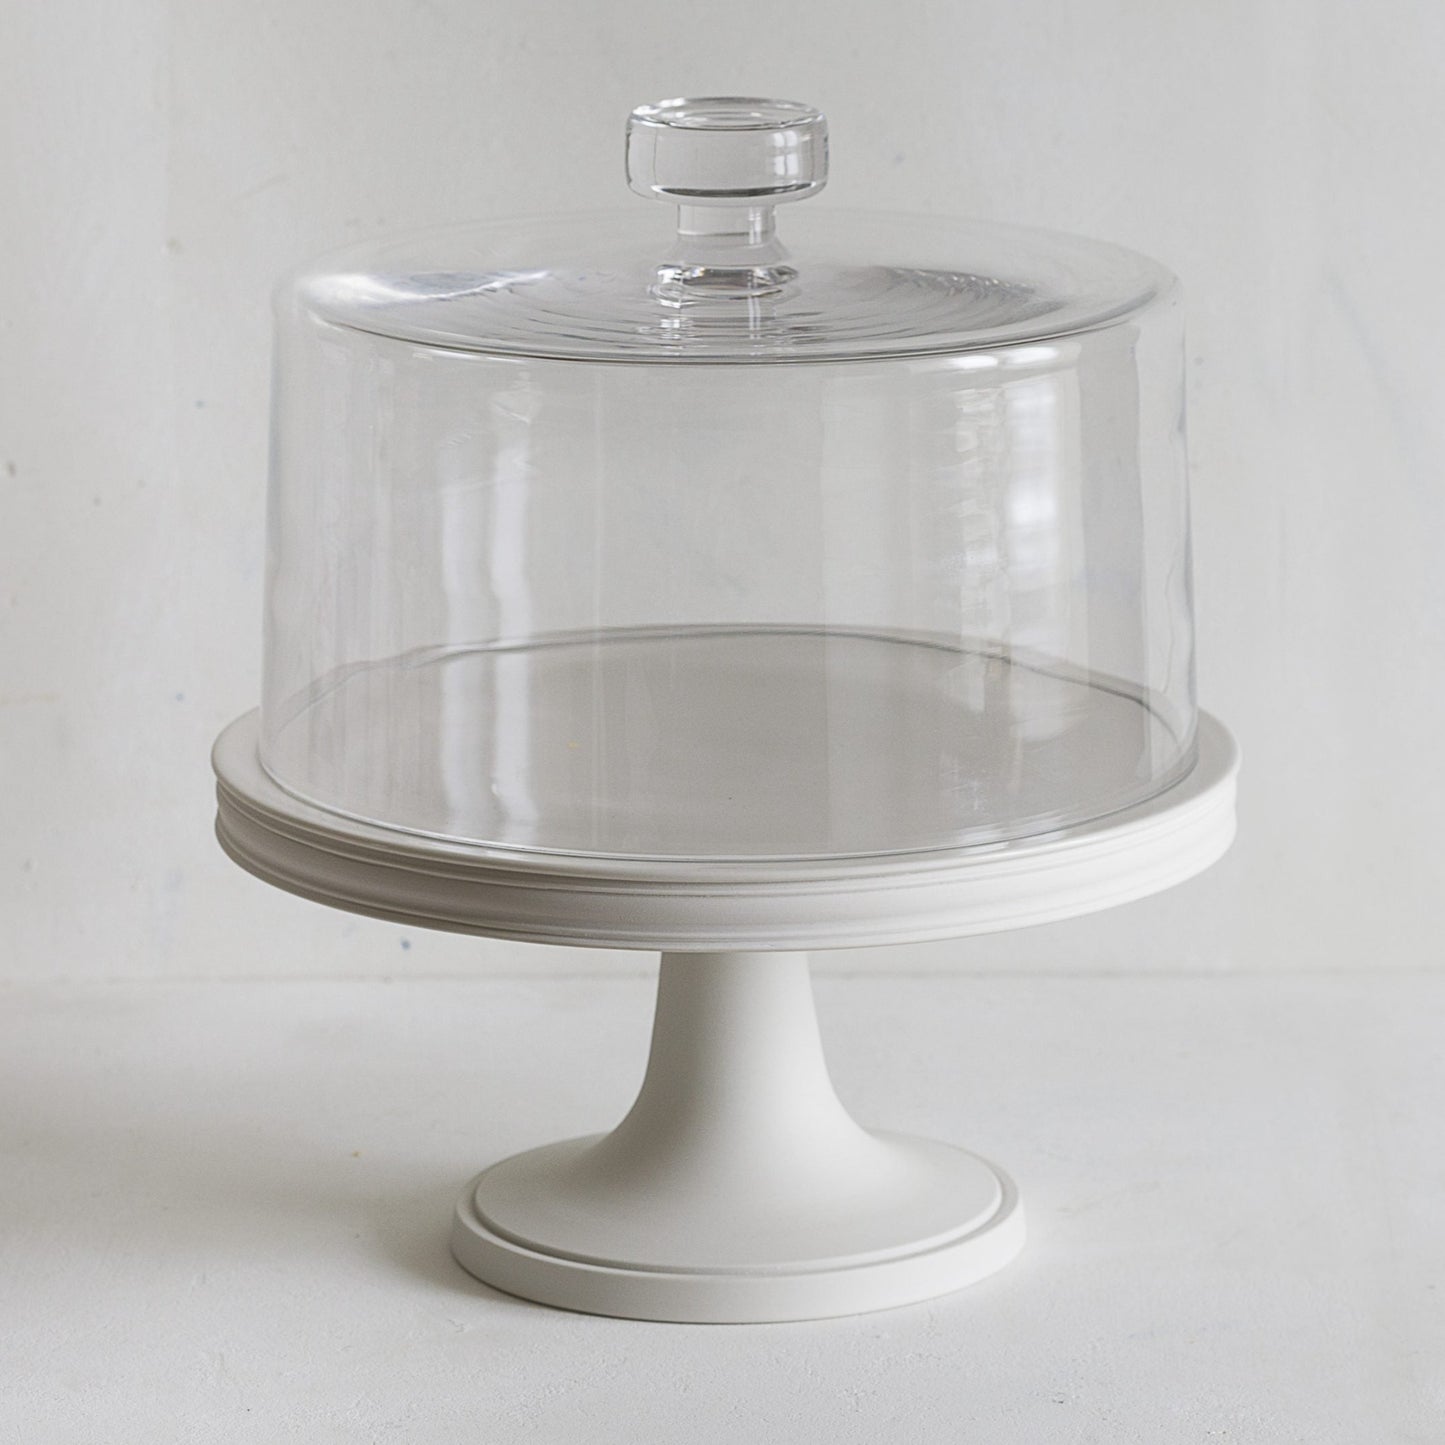 Classical Cake Stand, Large